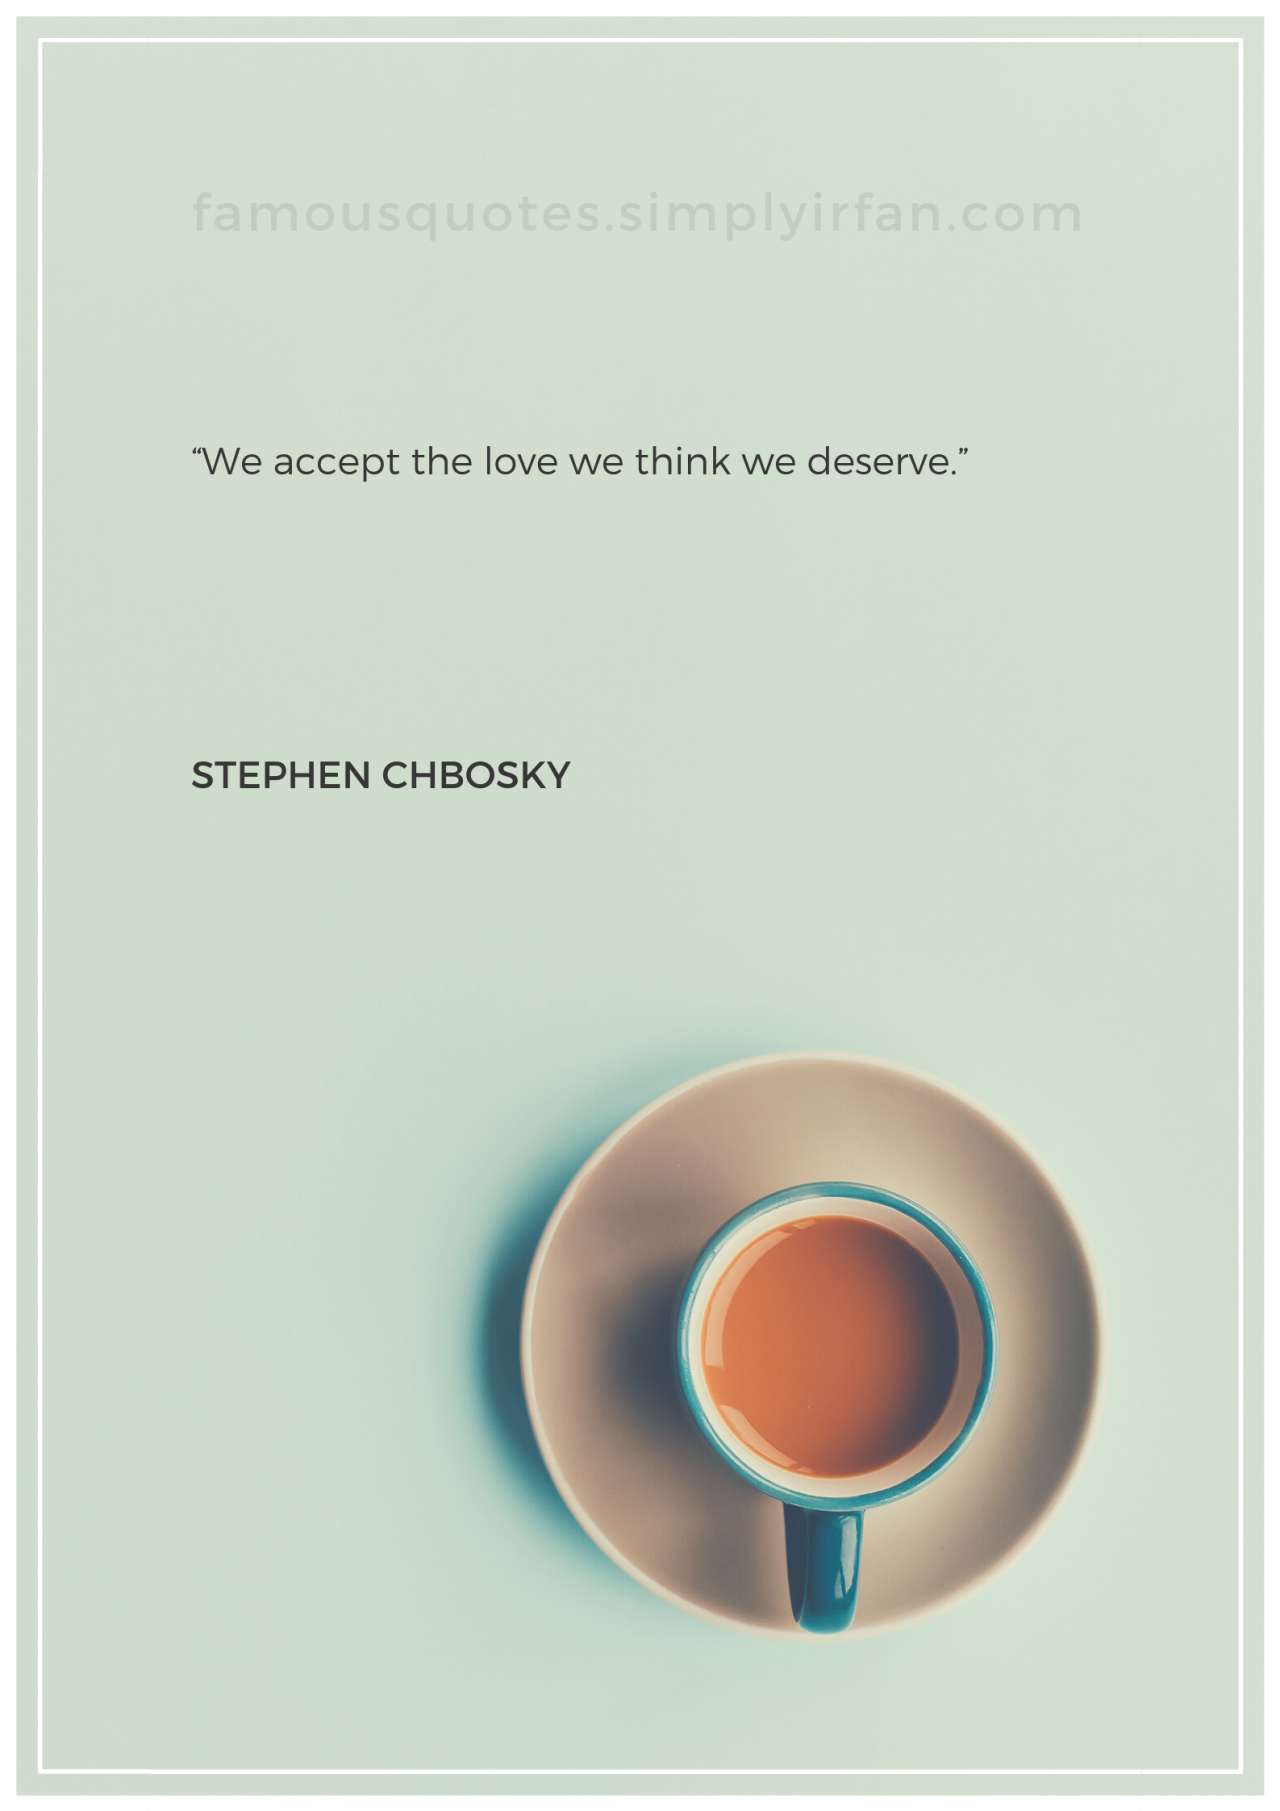 Famous Love Quote: "We accept the love we think we deserve." by Stephen Chbosky